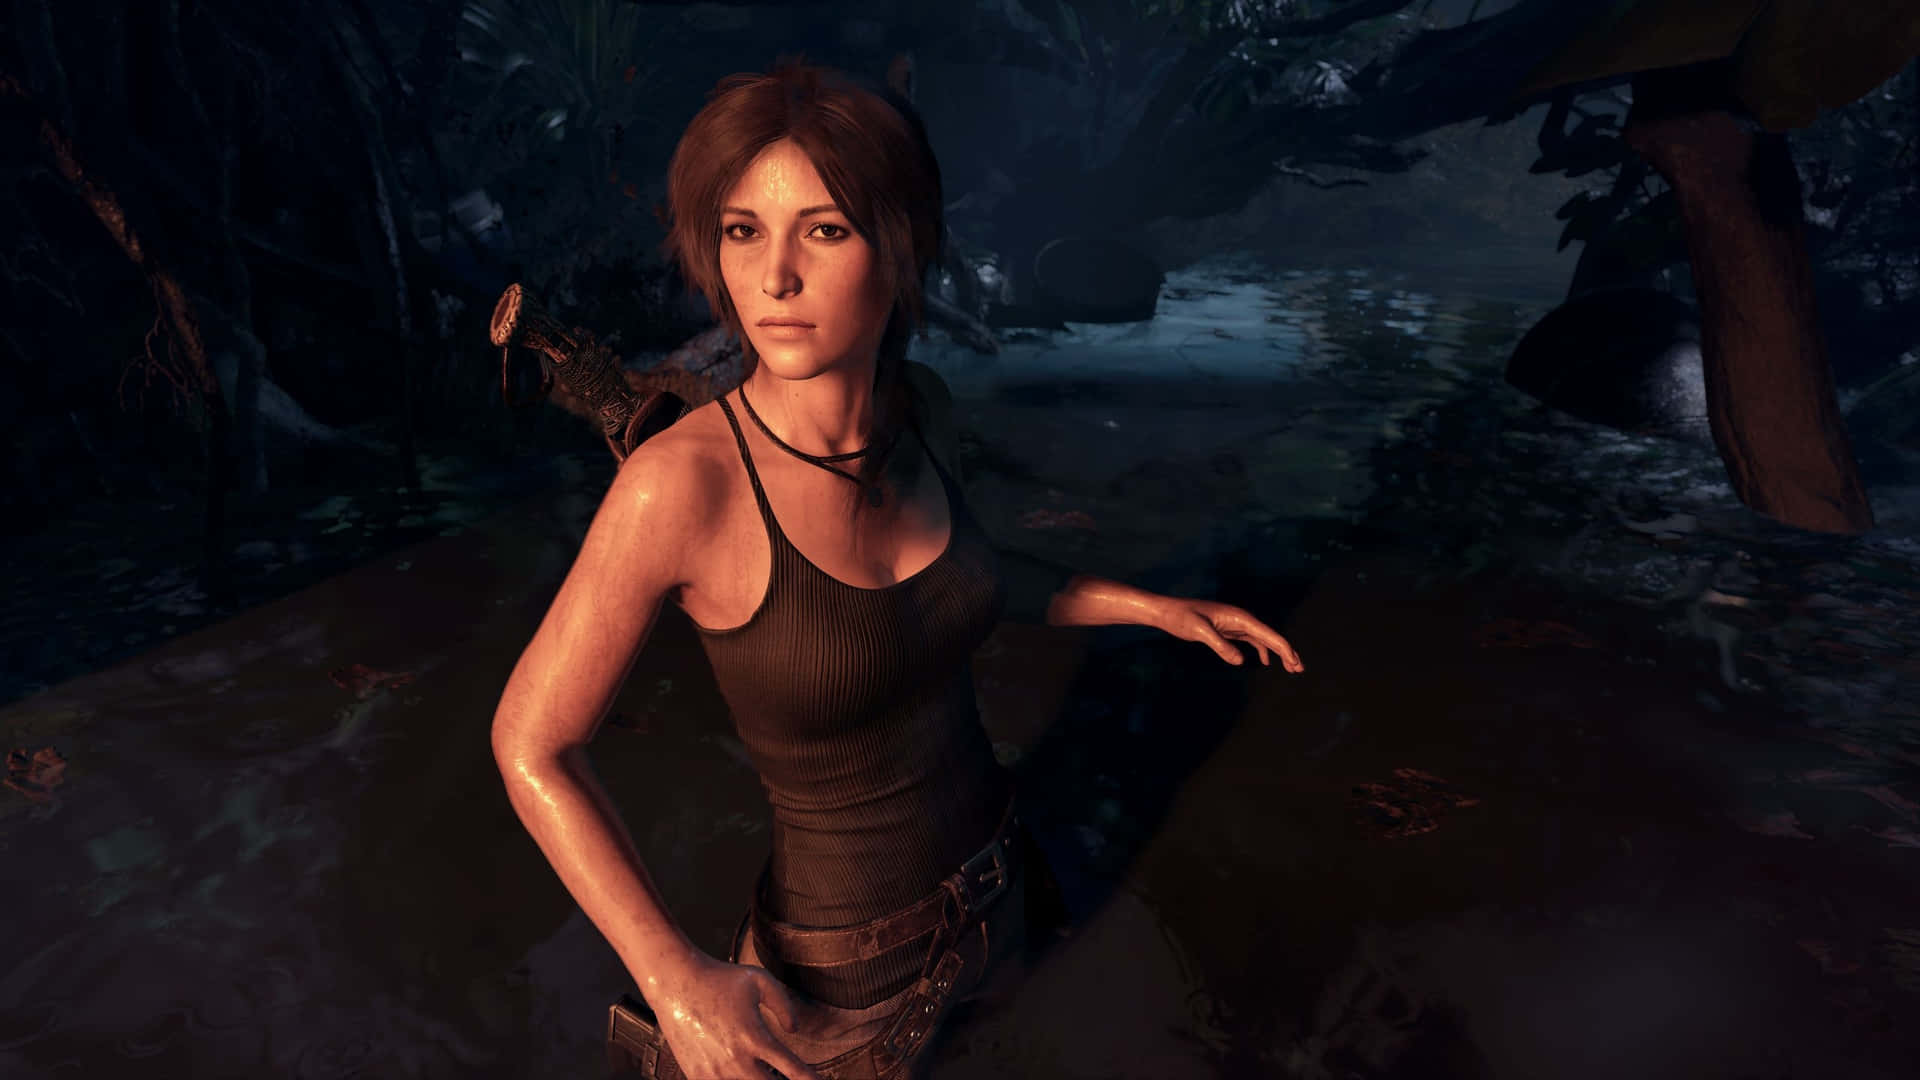 Lara Croft on Her Adventure in Shadow of the Tomb Raider